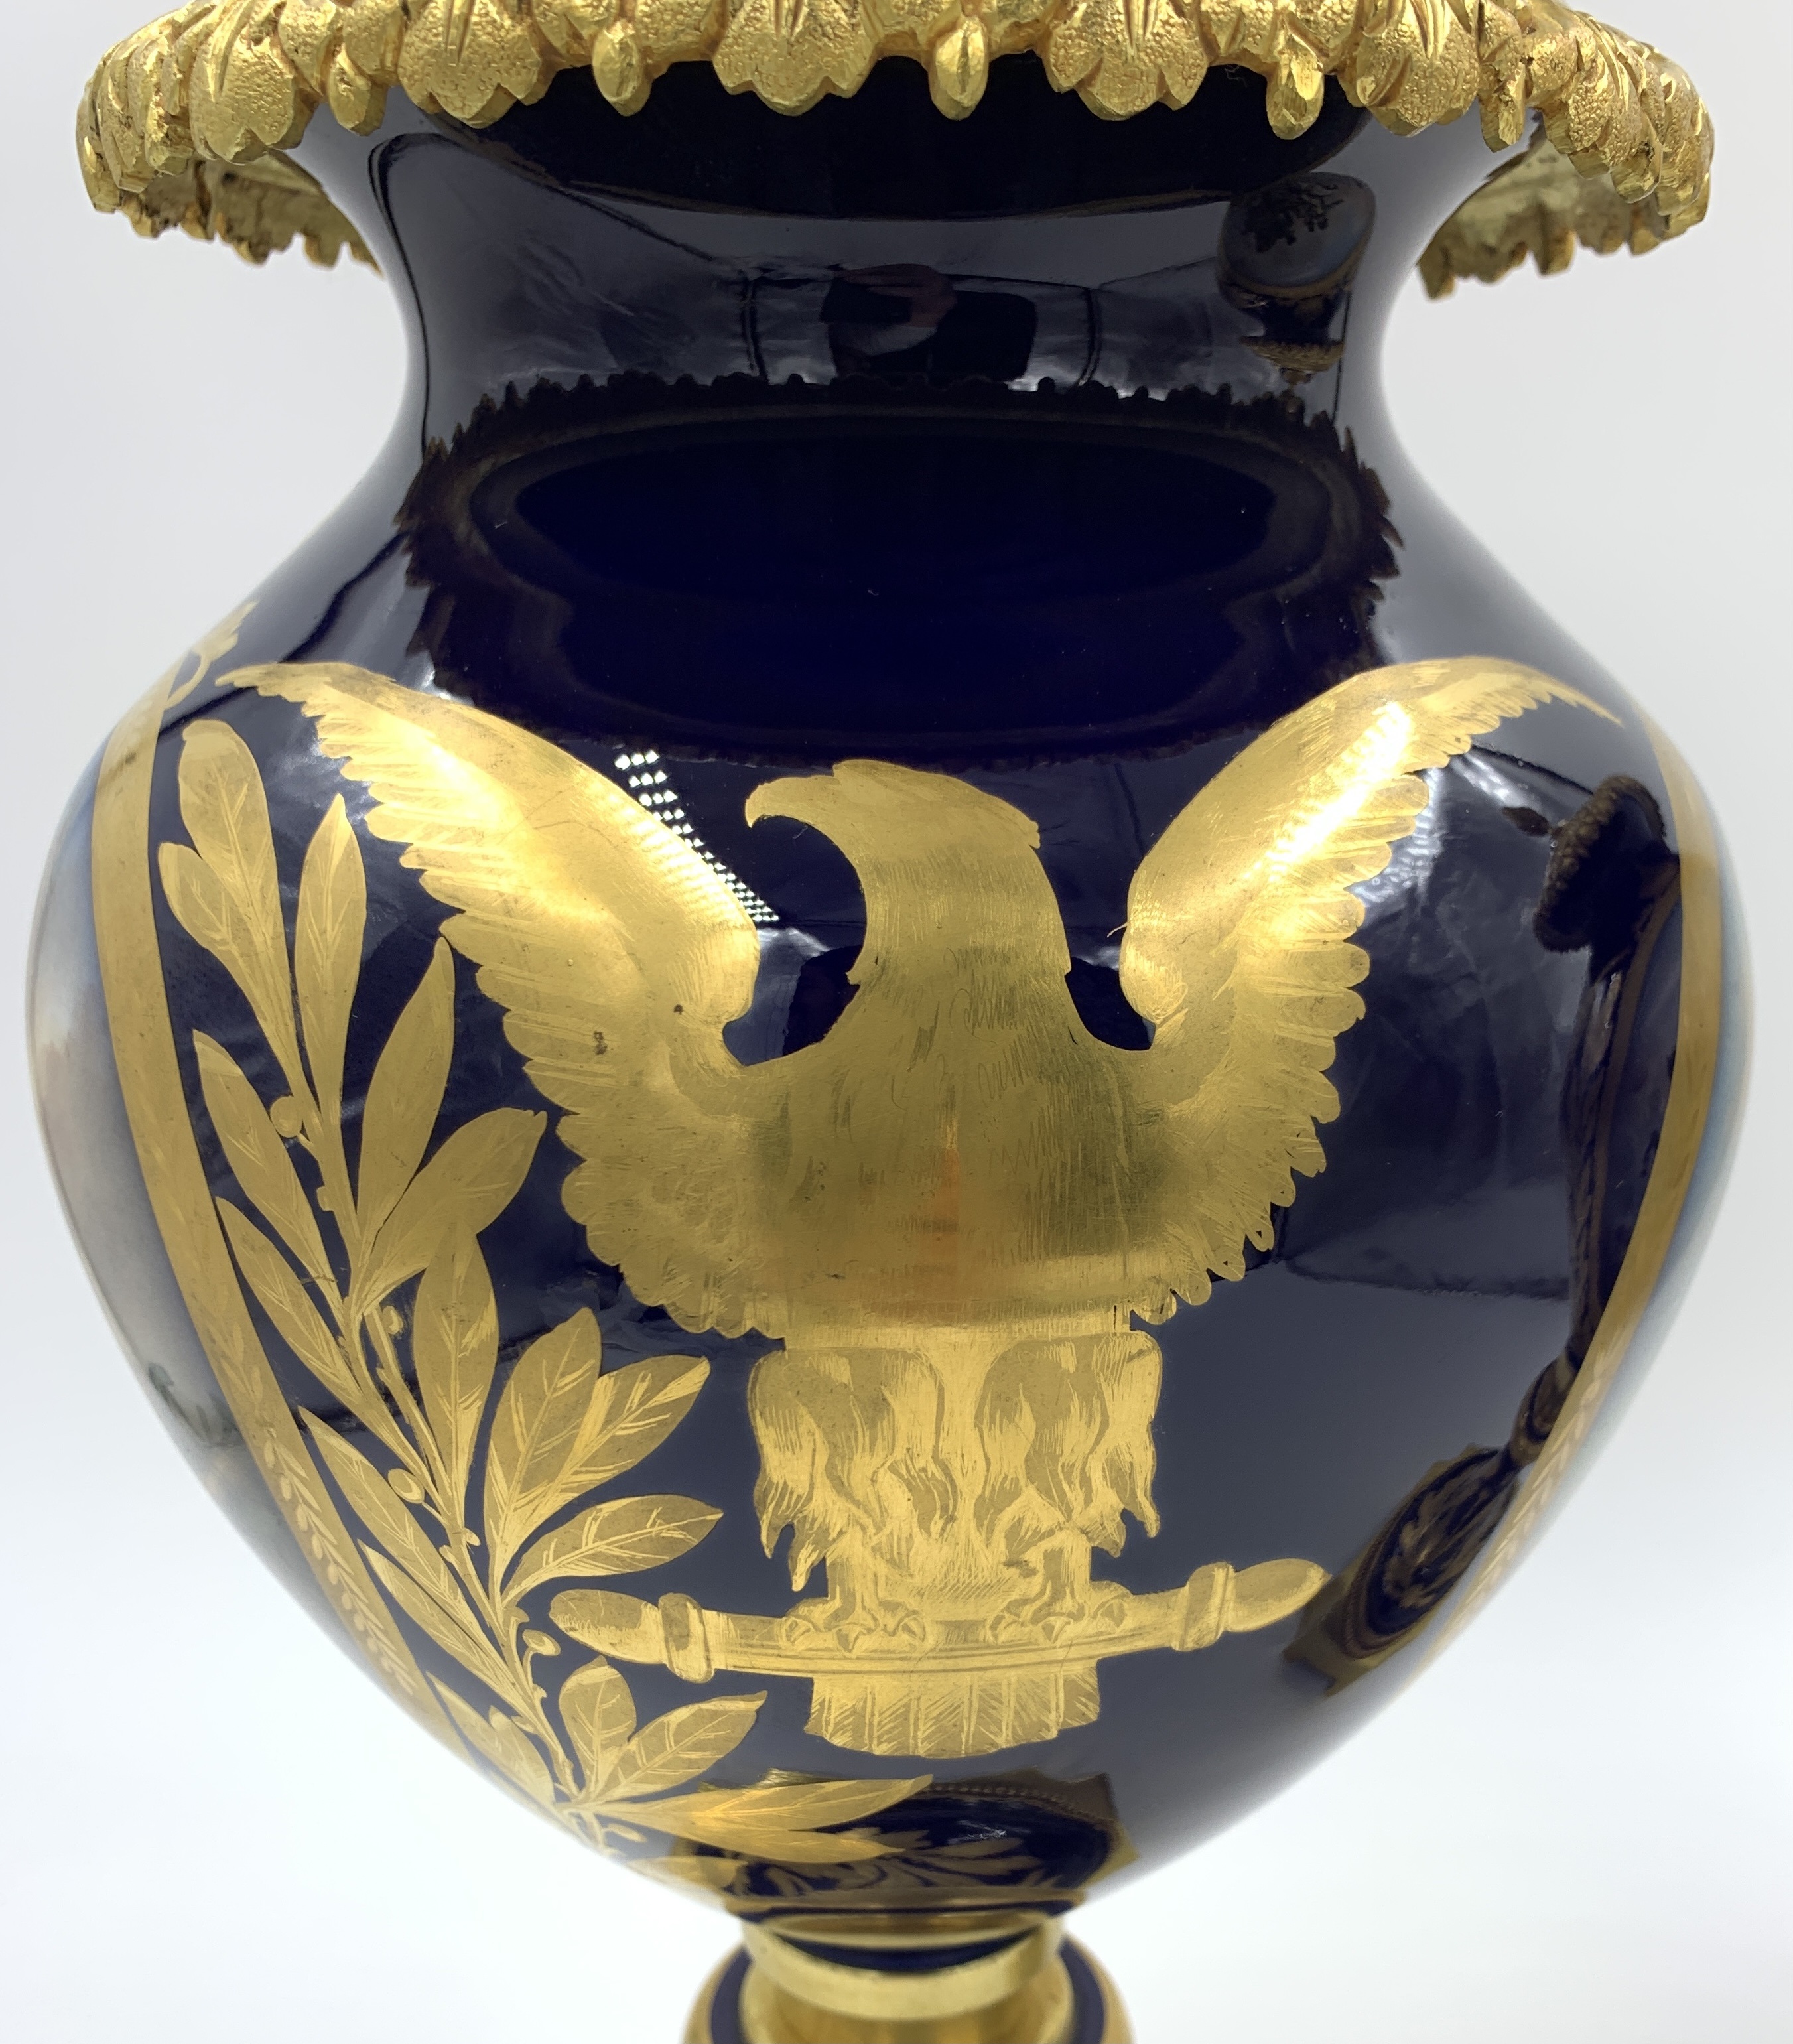 A FINE PAIR OF LATE 19TH / EARLY 20TH CENTURY SEVRES STYLE PORCELAIN NAPOLEON VASES - Image 13 of 14